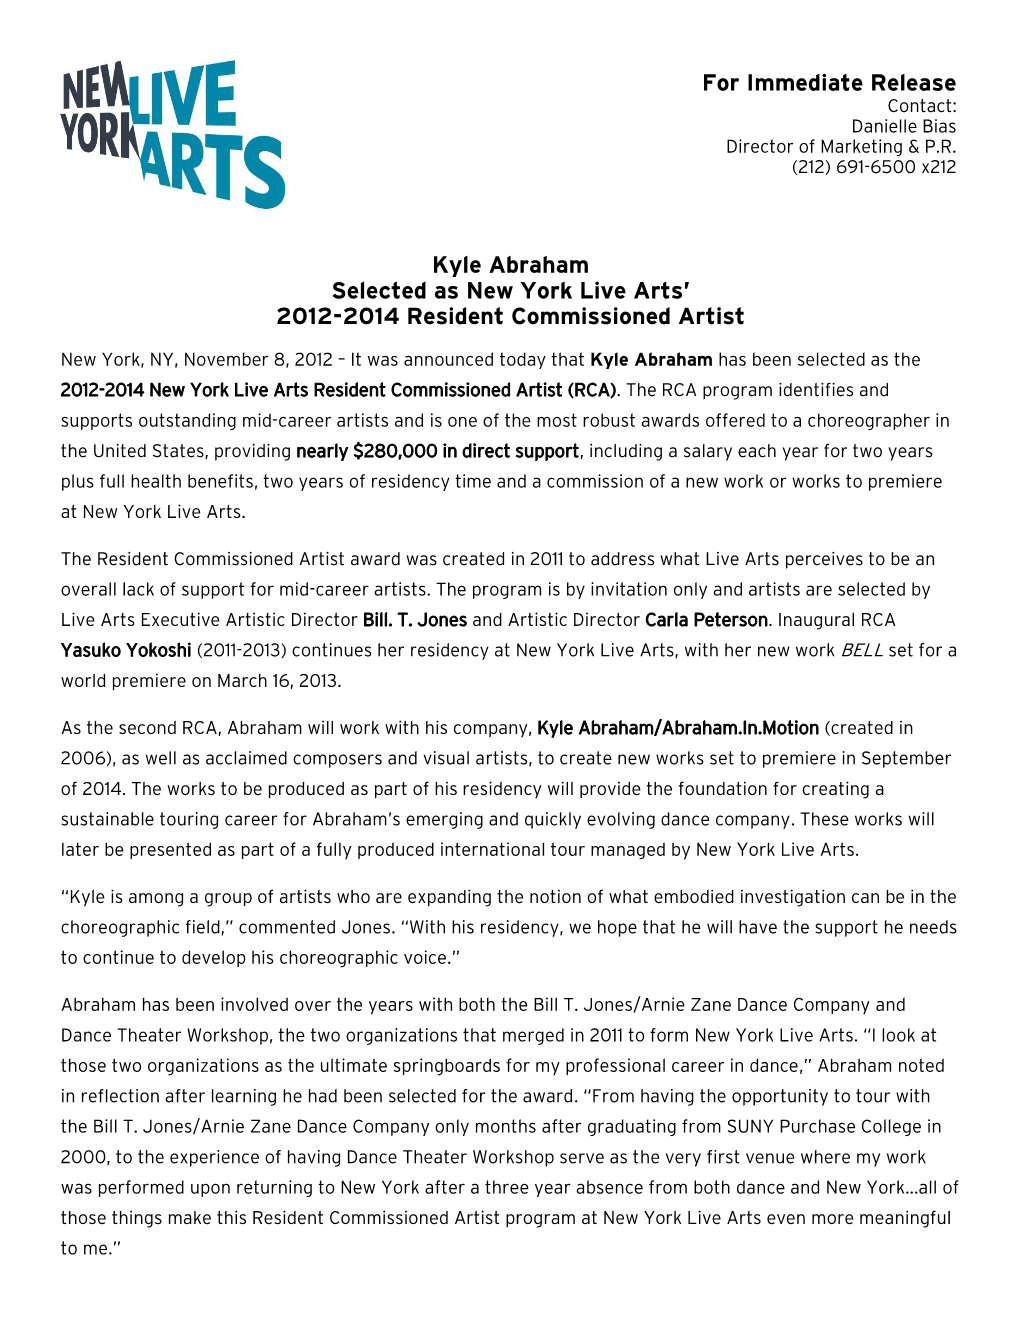 Kyle Abraham Selected As New York Live Arts' 2012-2014 Resident